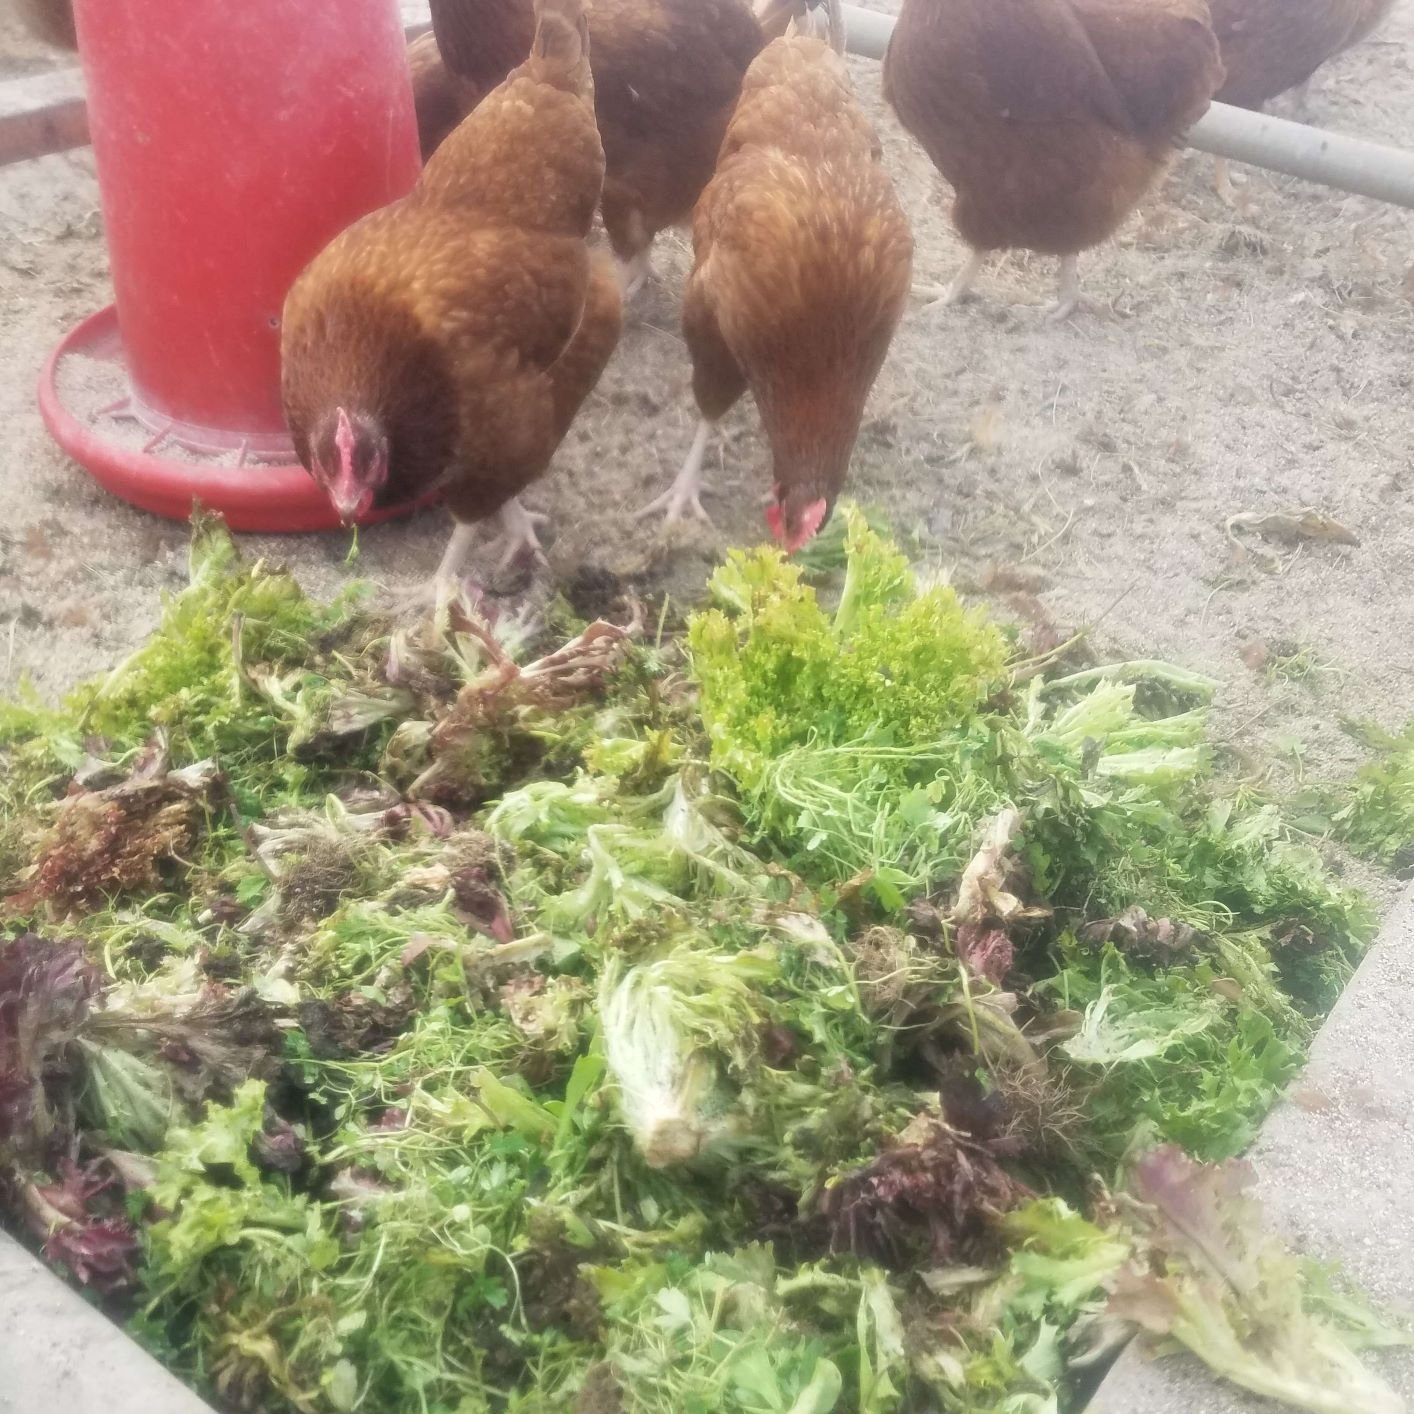 Previous Happening: Farm Happenings for March 6, 2019: Week 8 of 10!